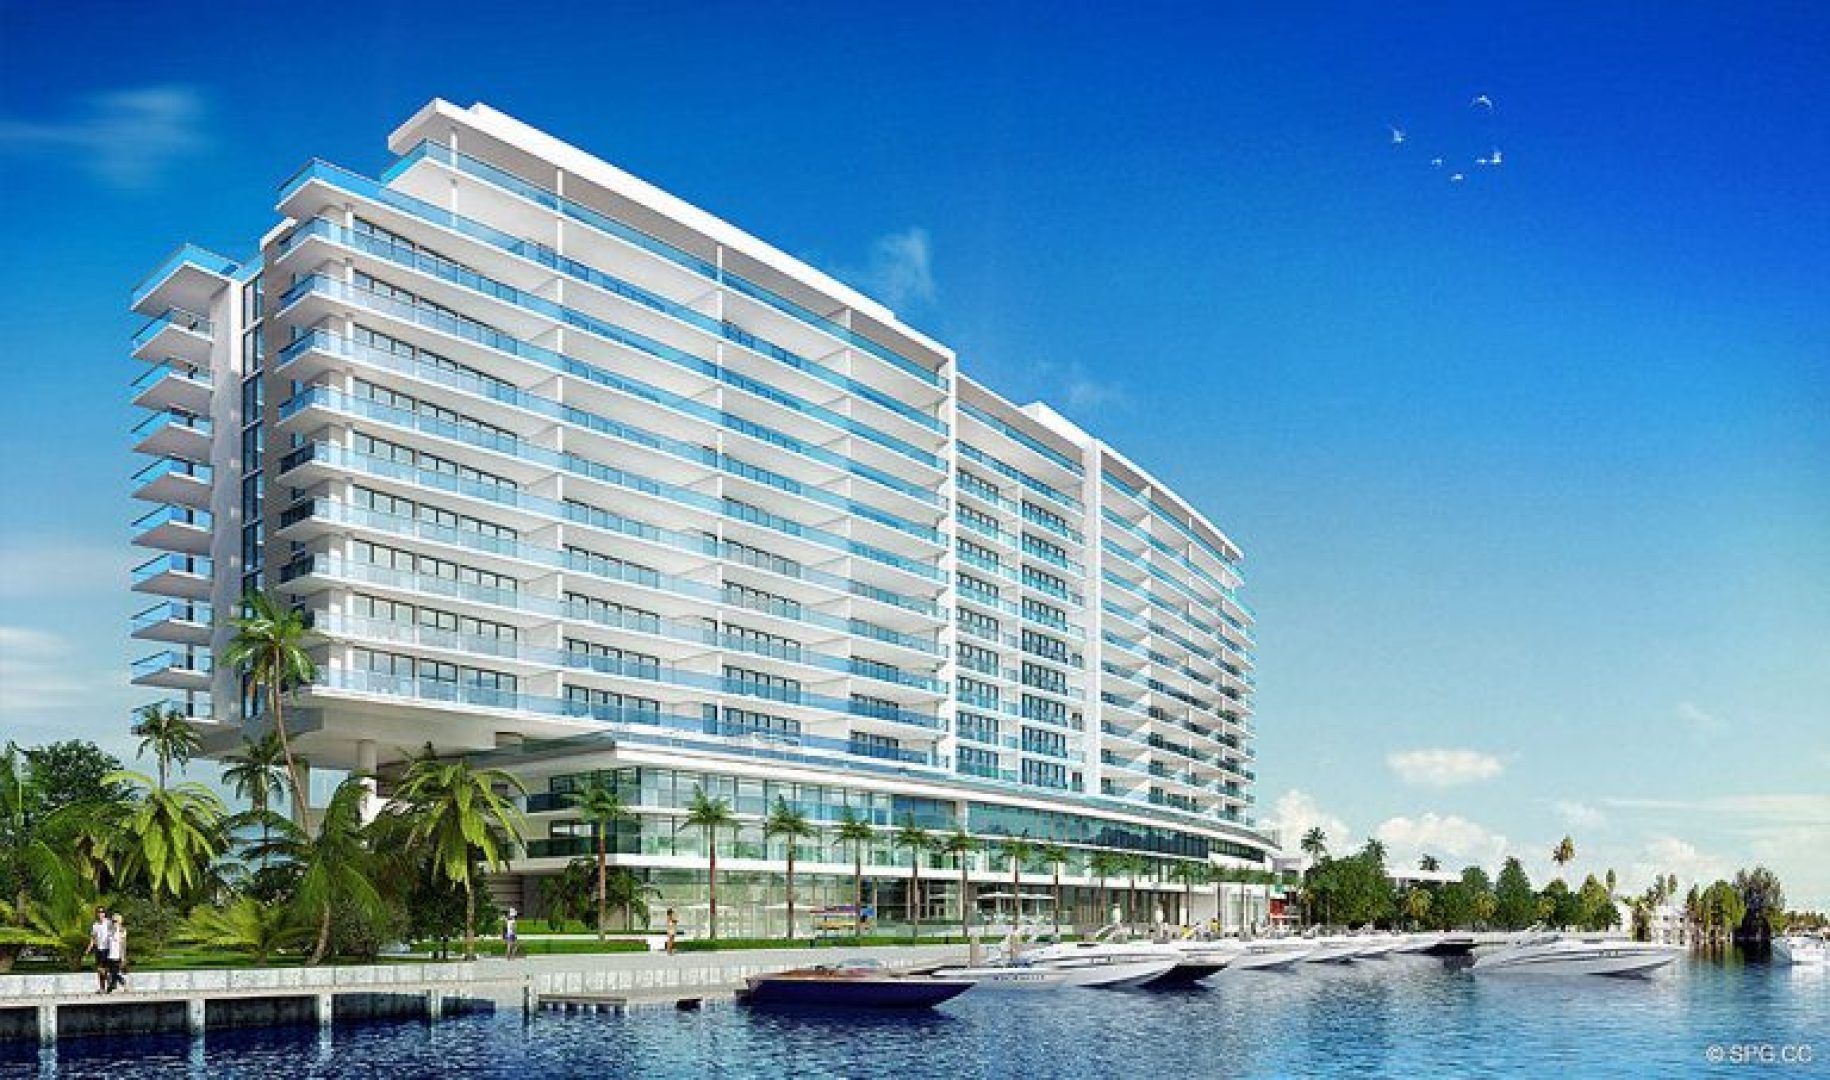 Concept Design for Riva, Luxury Waterfront Condos in Fort Lauderdale, Florida 33304.